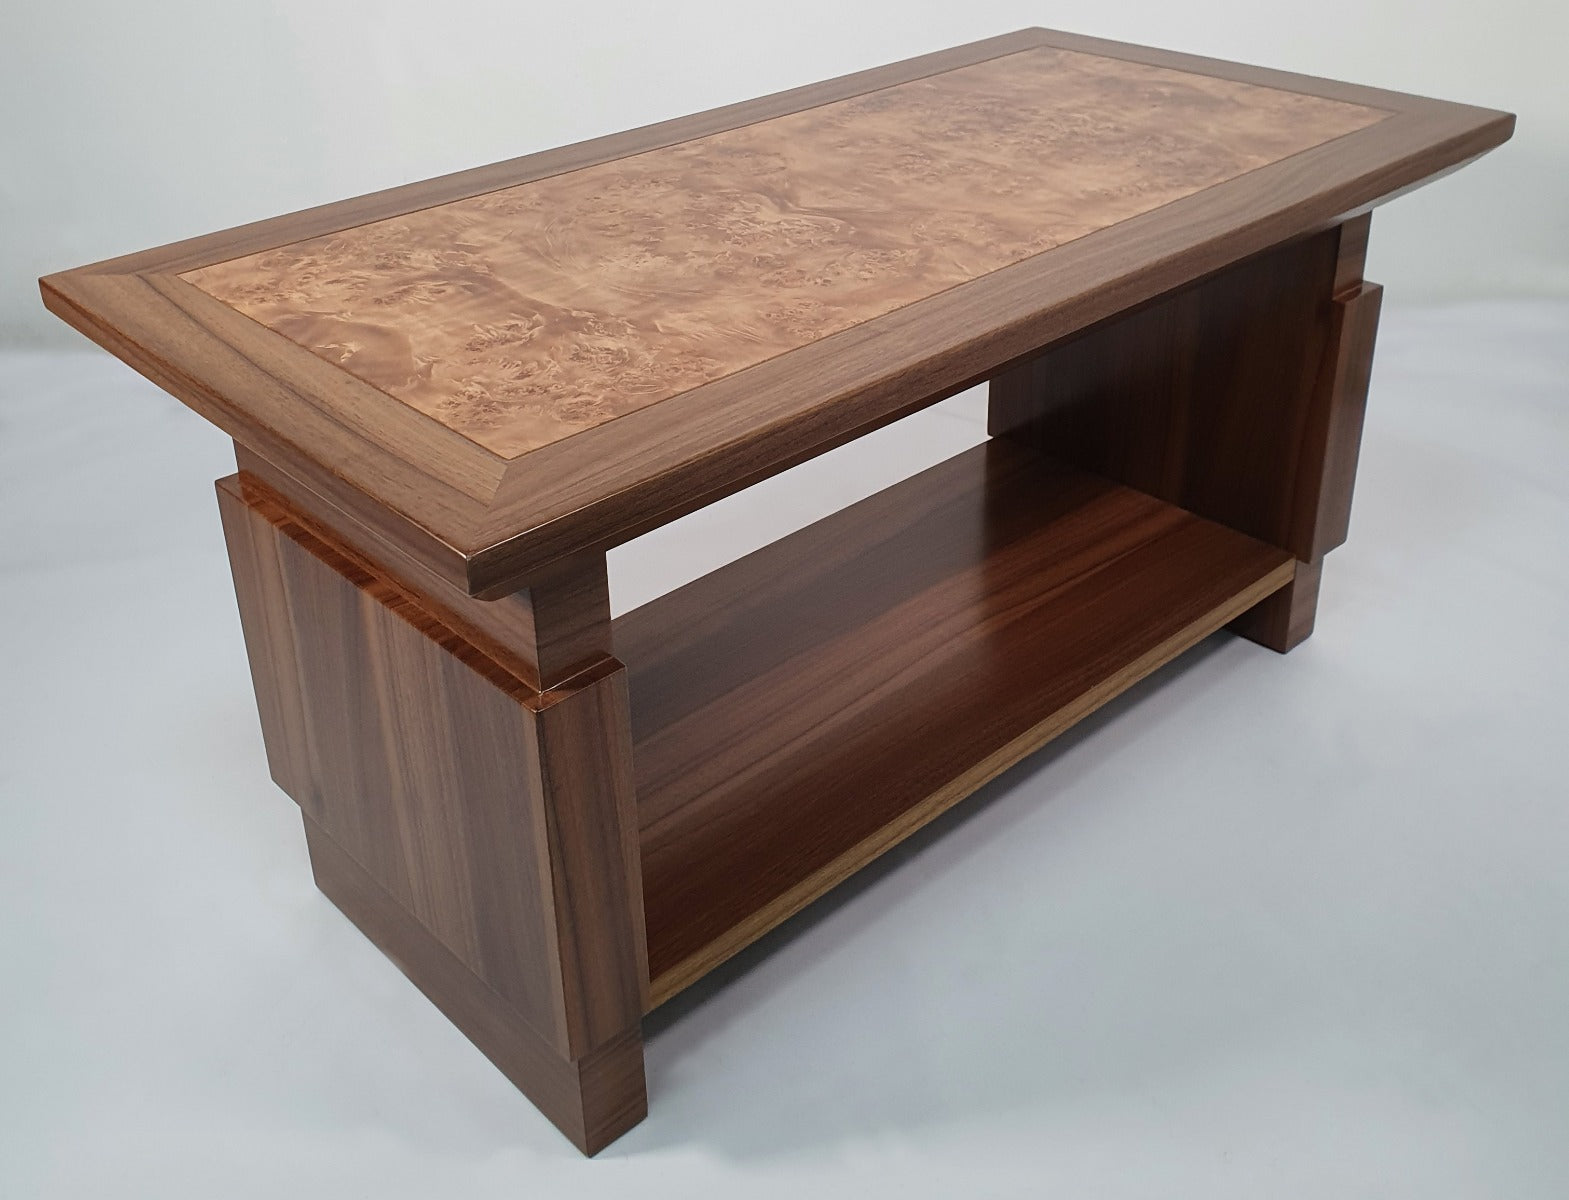 Large Light Oak Executive Coffee Table - F22-1000x500 North Yorkshire